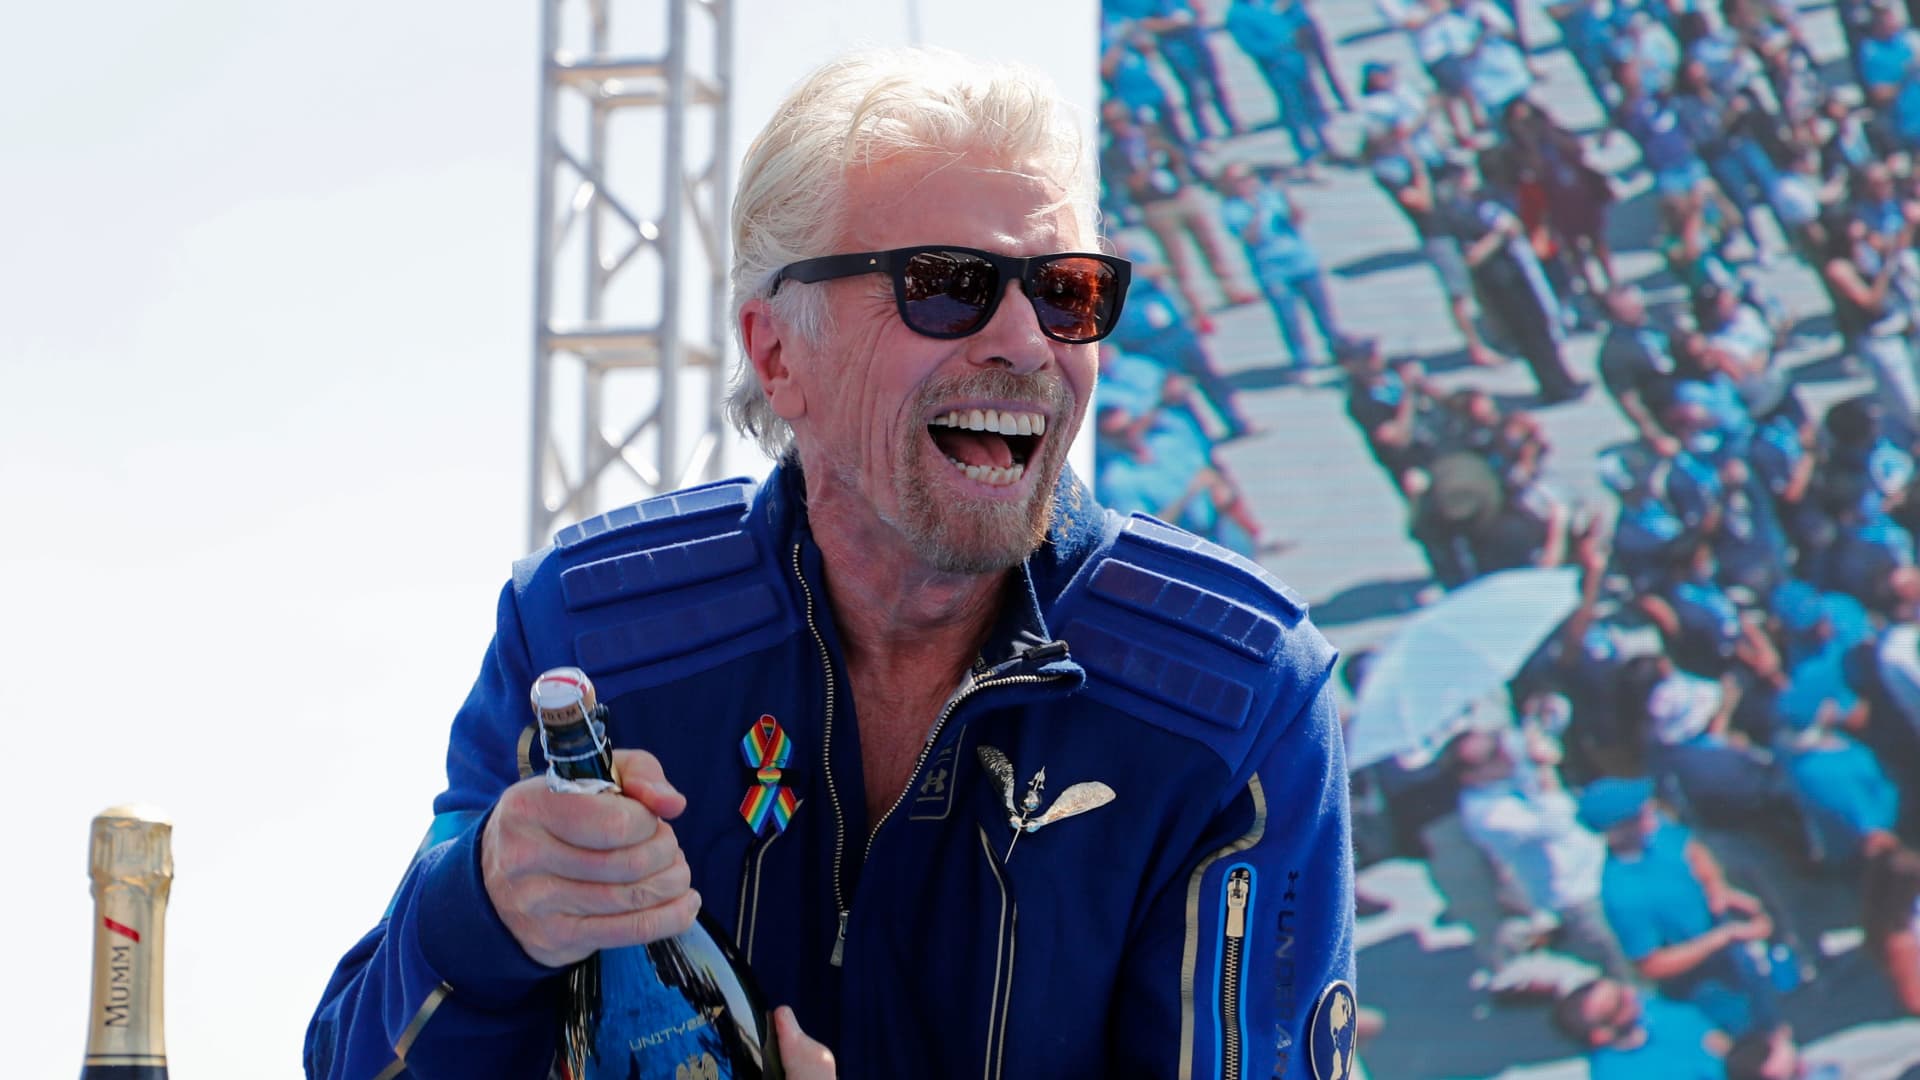 Richard Branson hopes to fly with Elon Musk’s SpaceX – World news for today